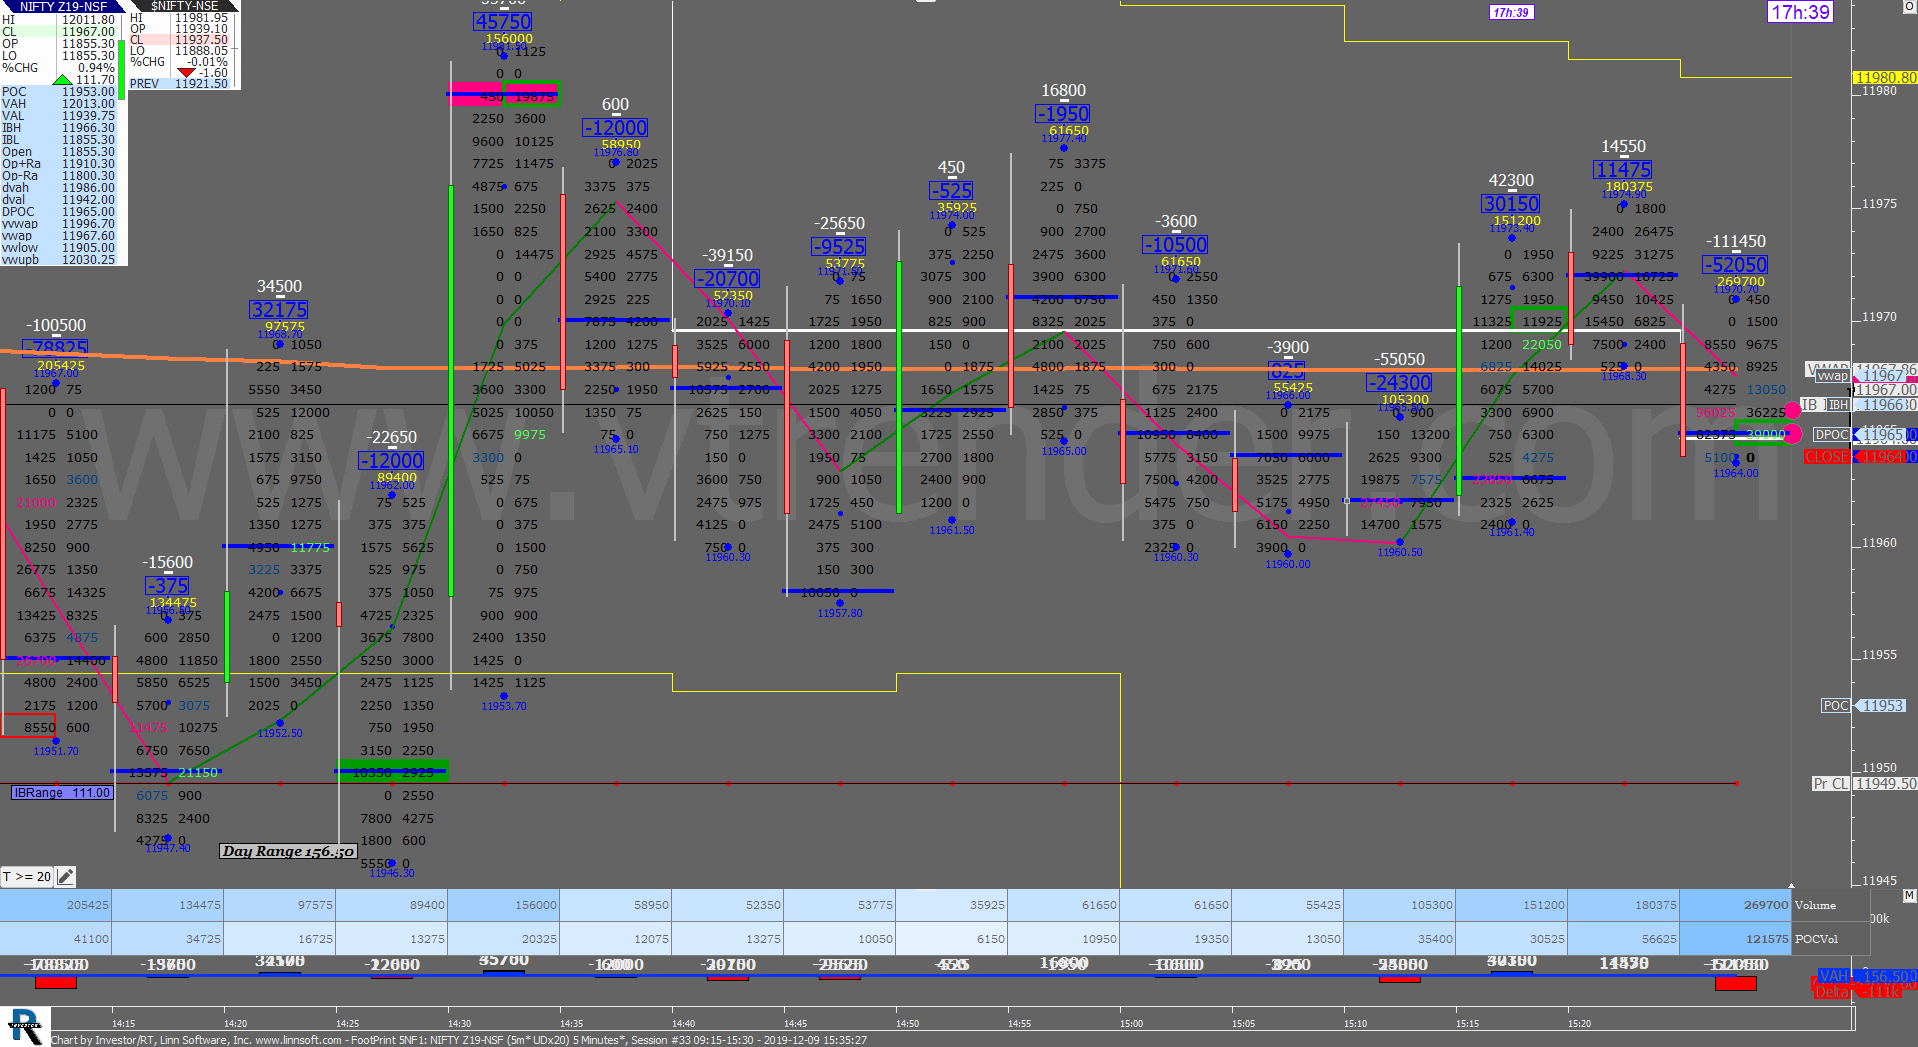 5 10 Order Flow Charts Dated 9Th Dec (5 Mins) Banknifty Futures, Day Trading, Intraday Trading, Intraday Trading Strategies, Nifty Futures, Order Flow Analysis, Support And Resistance, Trading Strategies, Volume Profile Trading